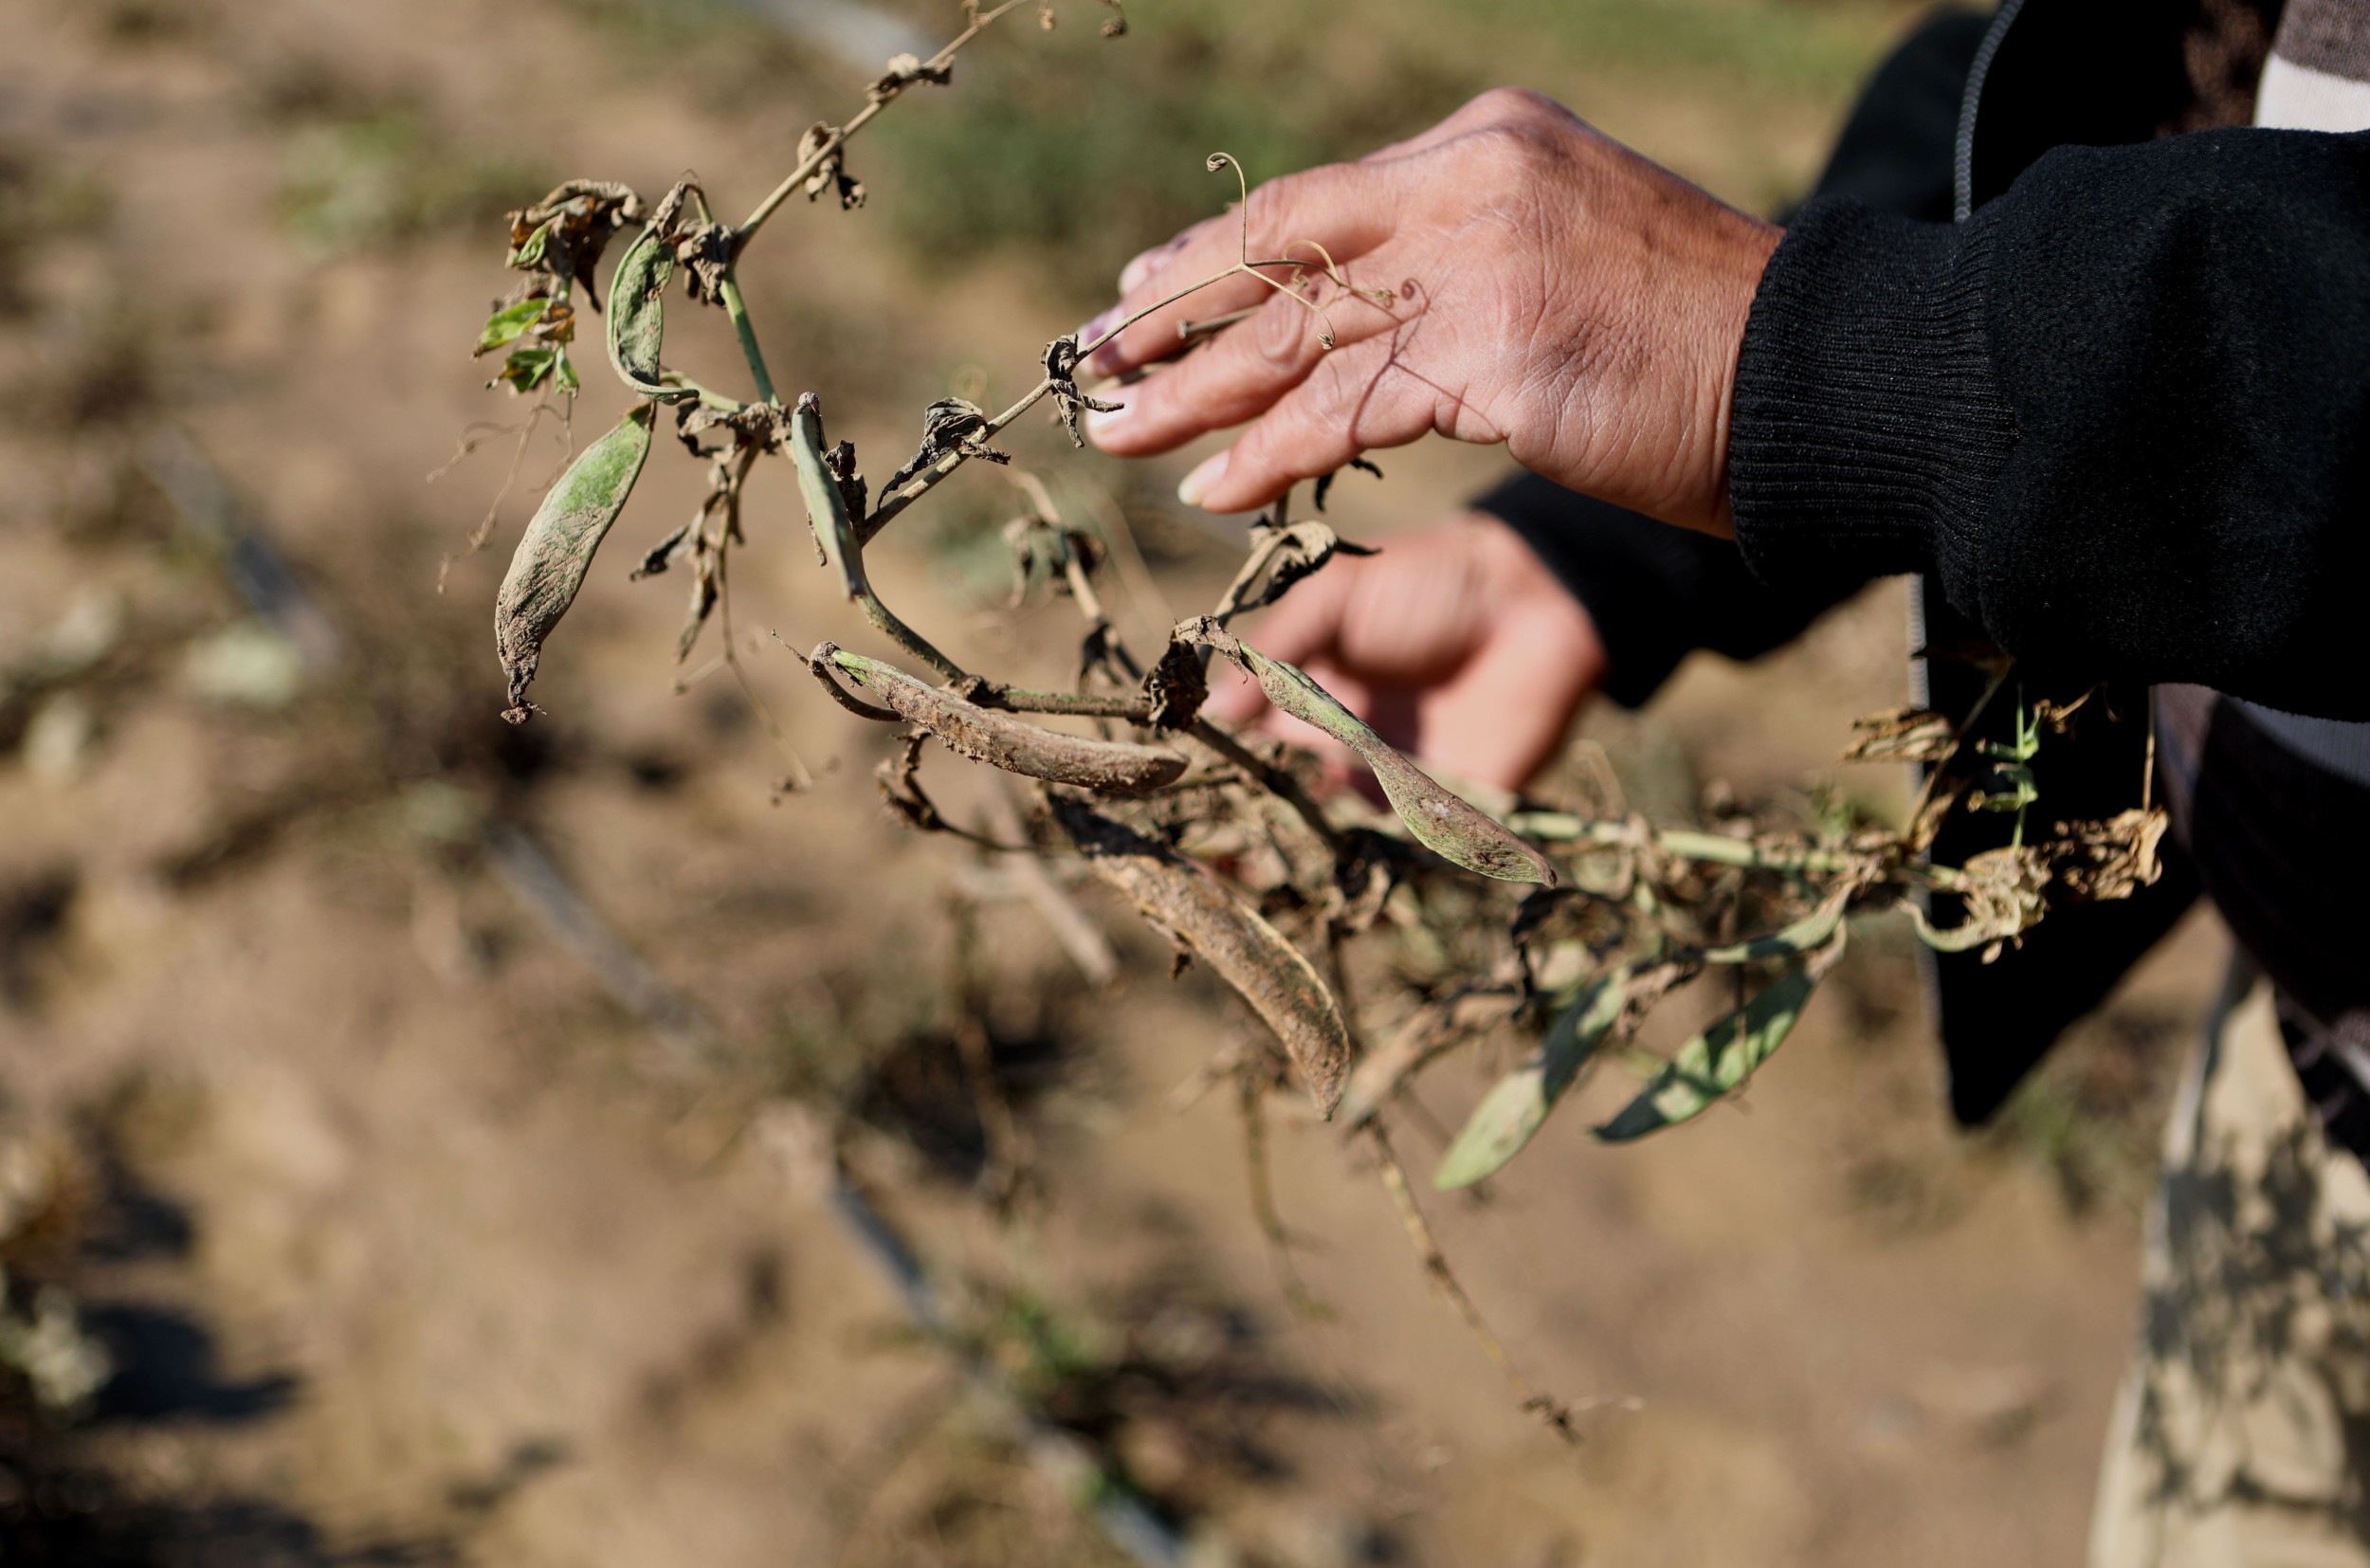 Aref Shamali shows rotten peas due to the flooding of agricultural lands in eastern Gaza (MEE/Mohammed al- Hajjar)